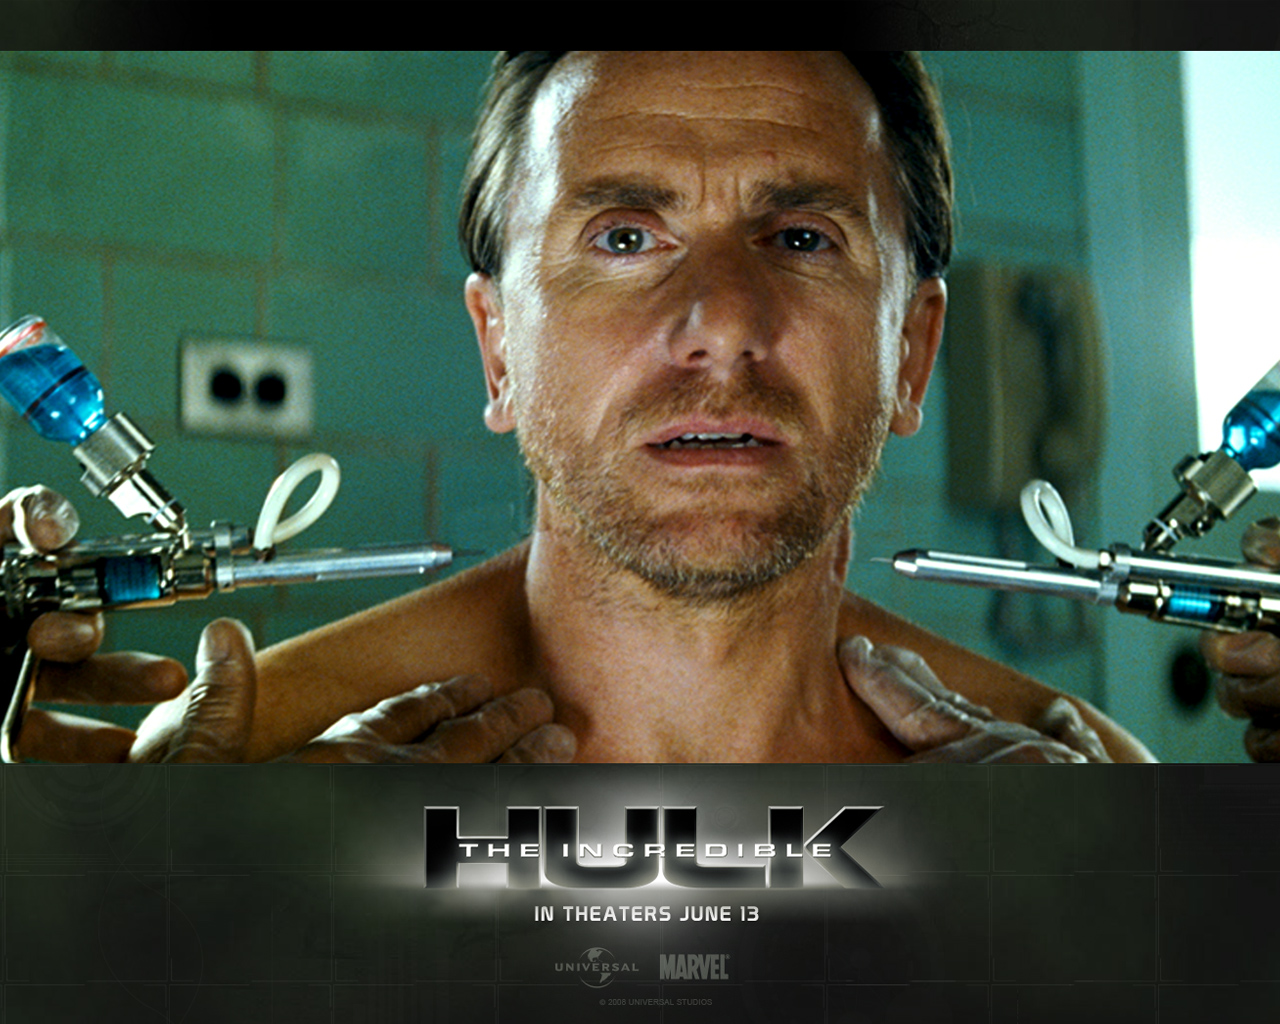 Download High quality The Incredible Hulk wallpaper / Movies / 1280x1024